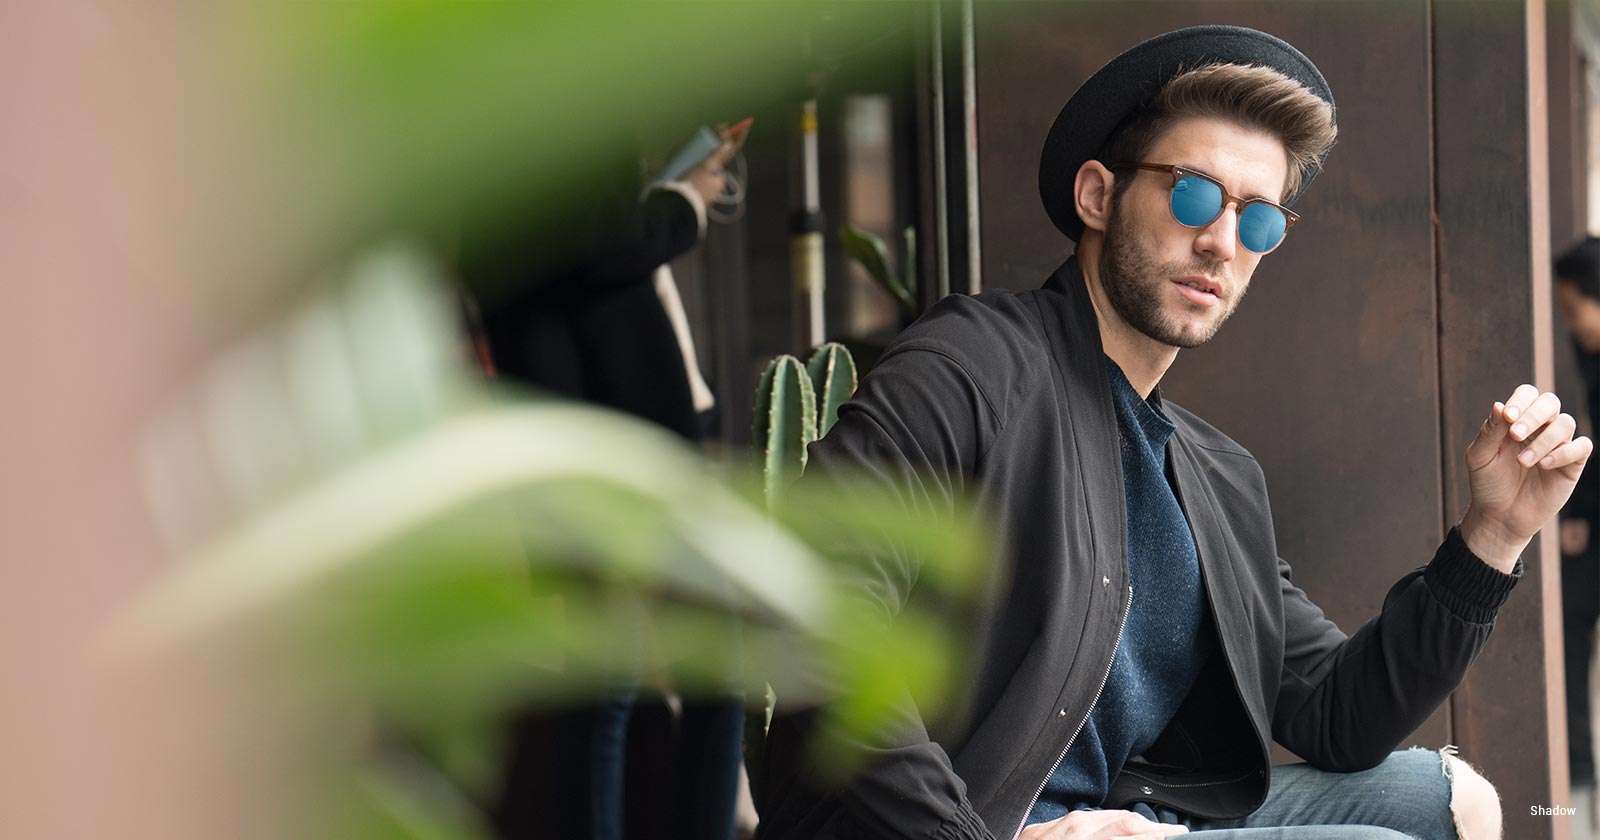 Blue Mirror Sunglasses for Every Occasion | Blog | Eyebuydirect